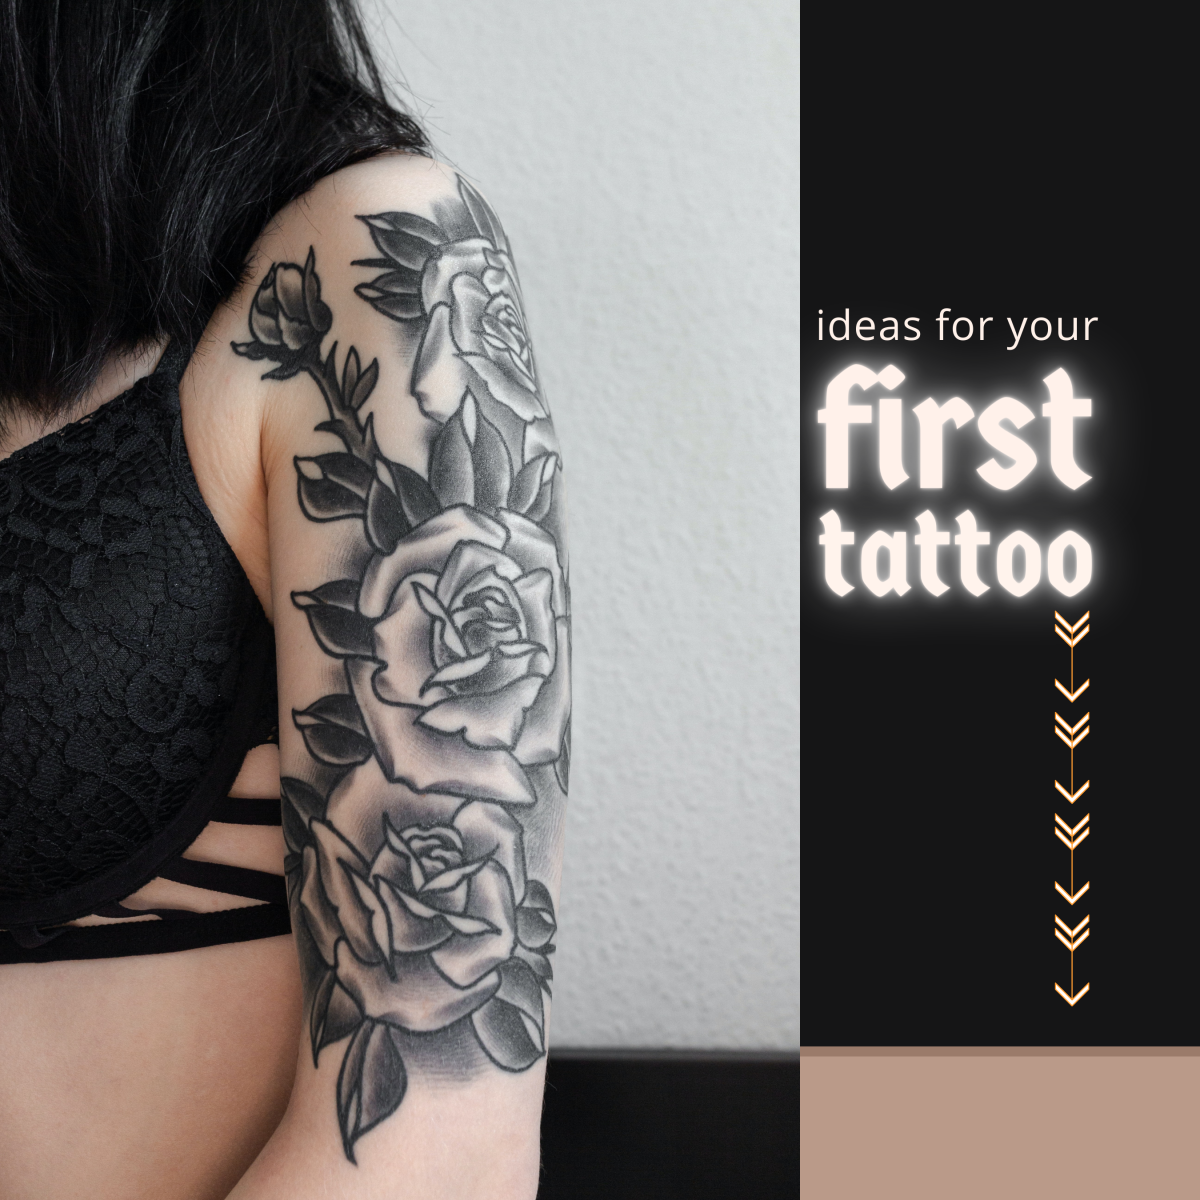 Your First Tattoo: Ideas, Designs, and Pictures - TatRing